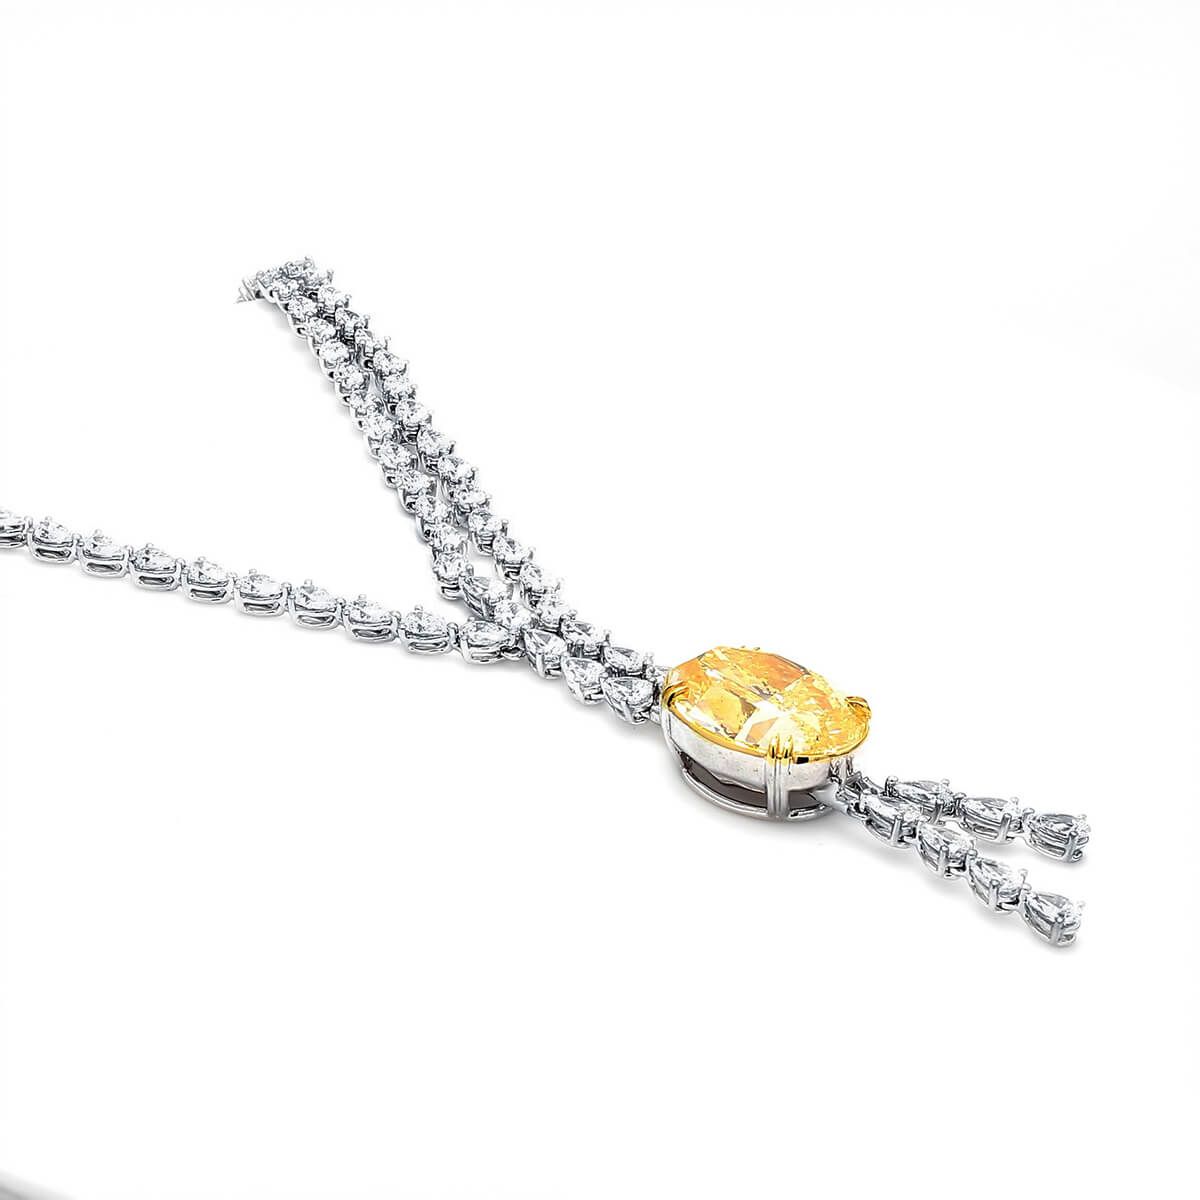 Light Yellow (Y-Z) Diamond Necklace, 13.02 Ct. (26.76 Ct. TW), Oval shape, GIA Certified, 6197482449